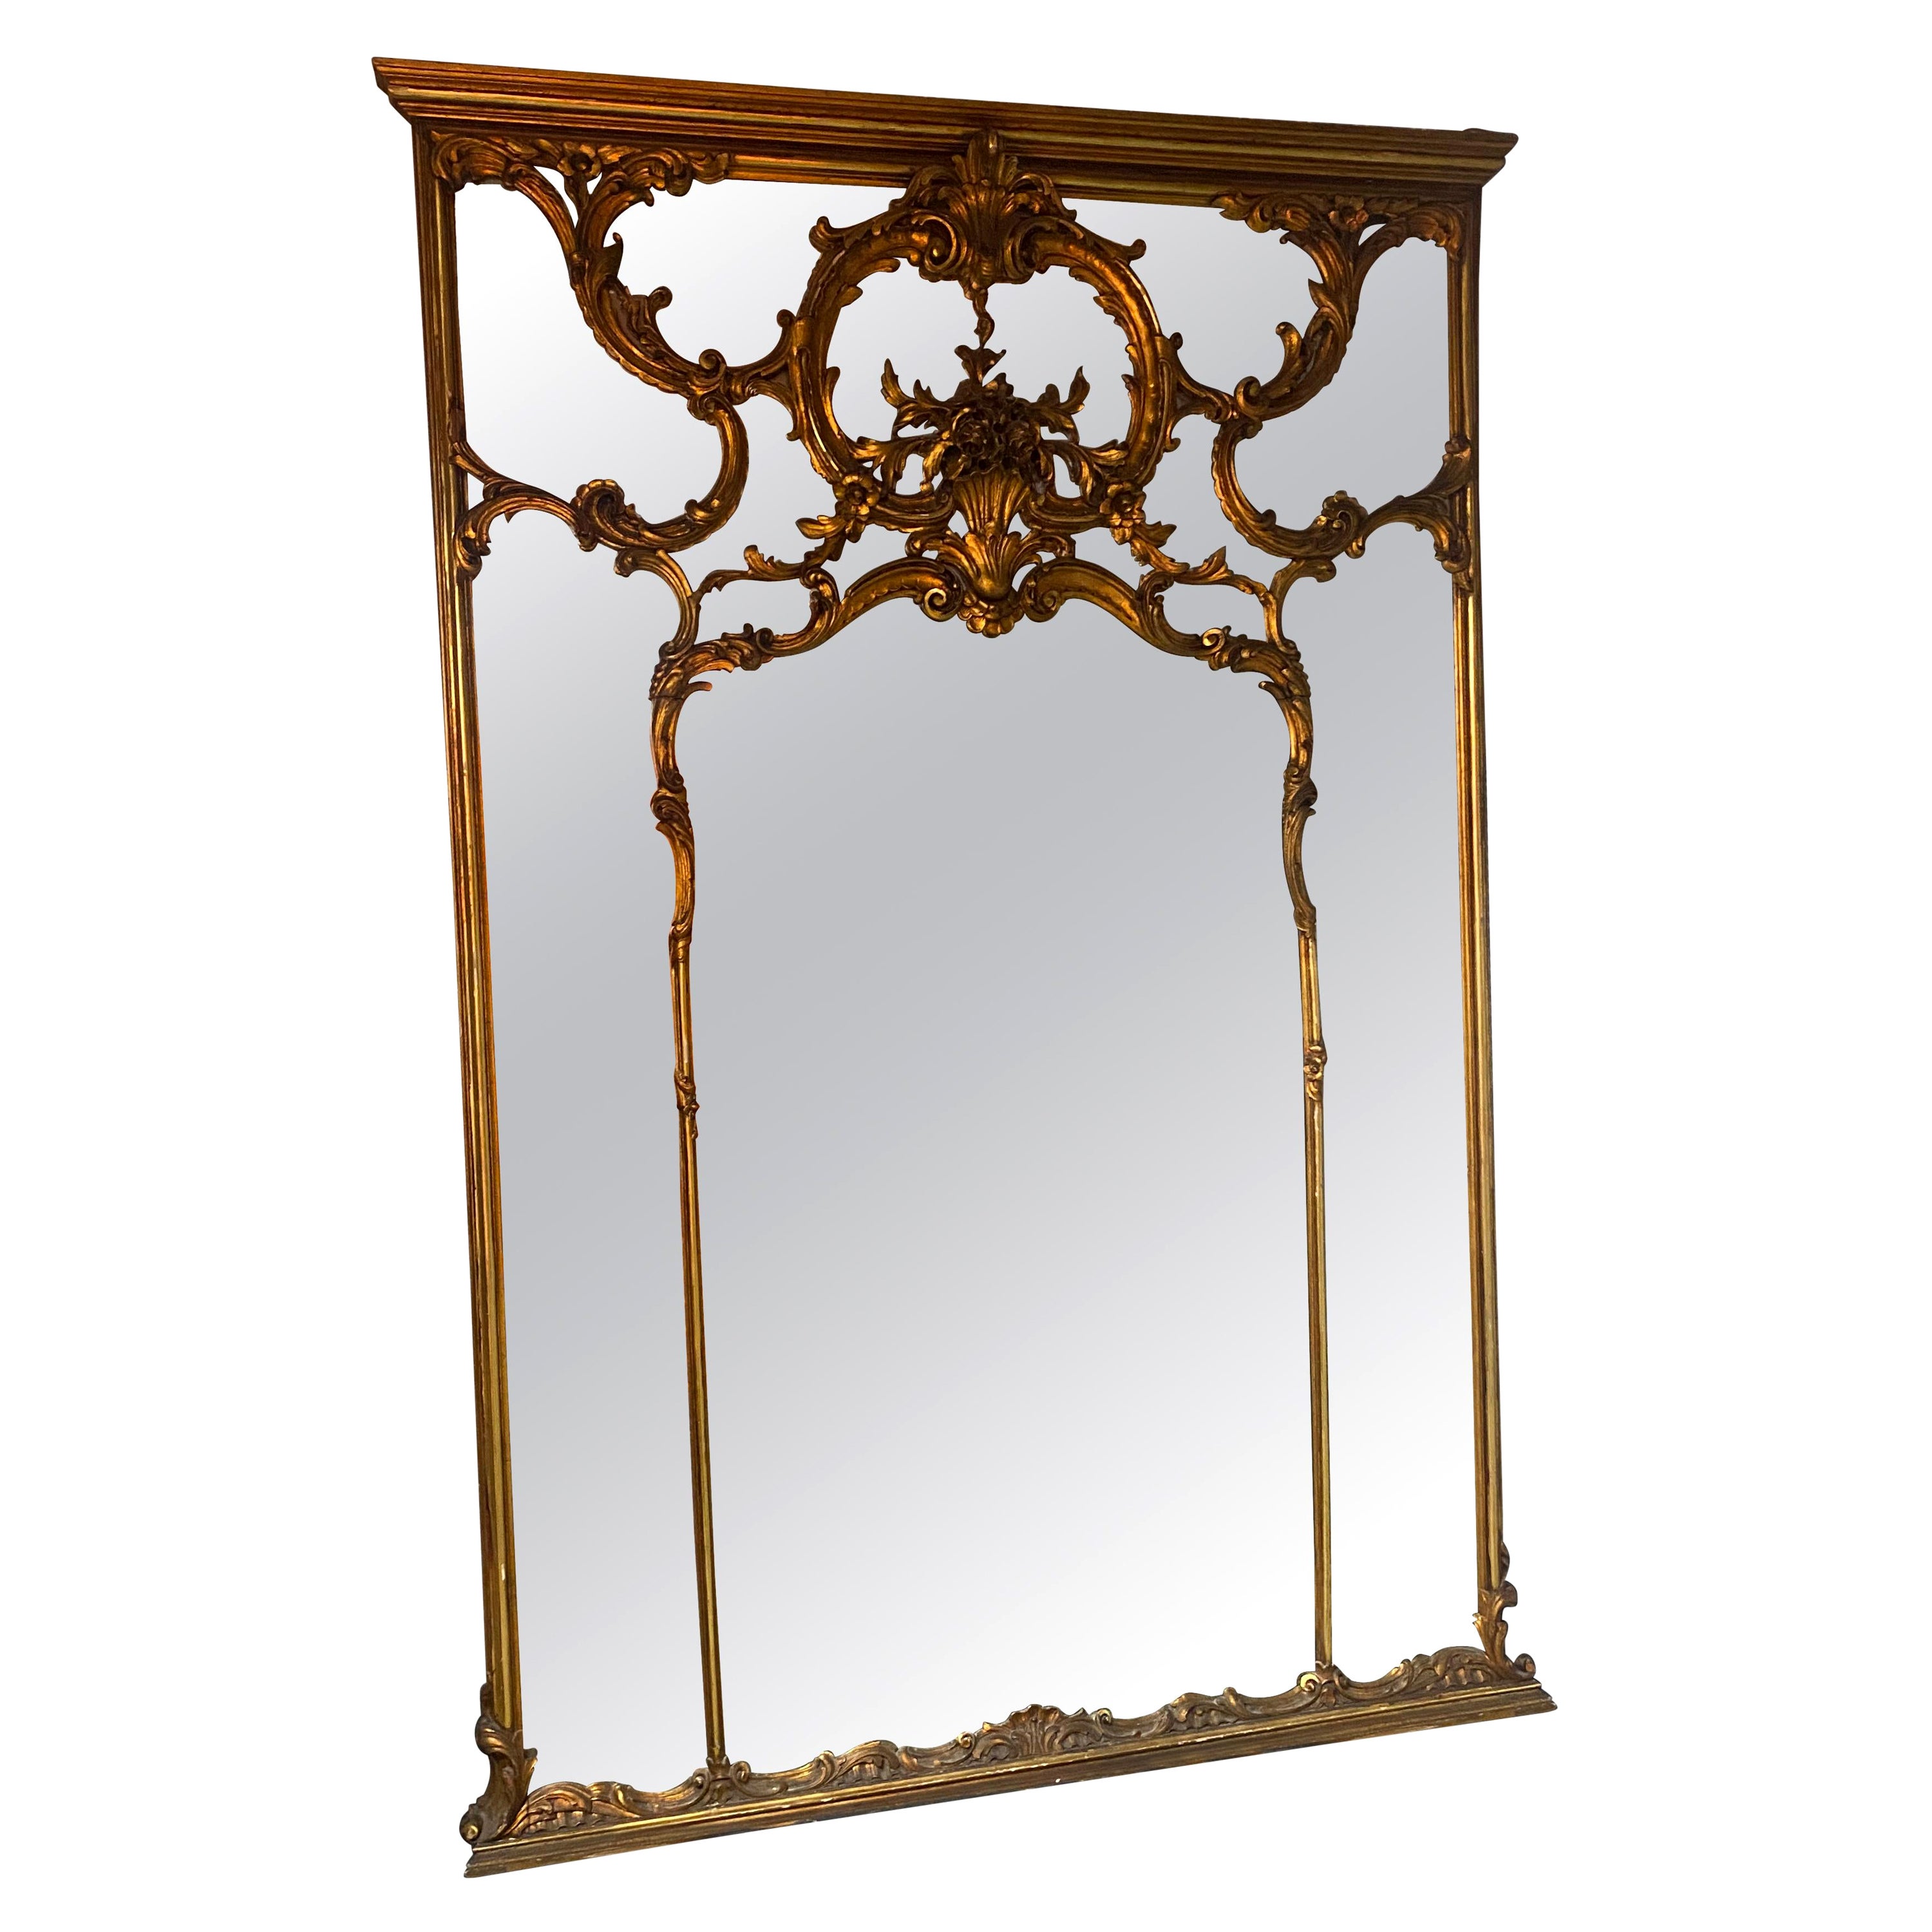 Antique, Decorative, Giltwood, Full Length Mirror  For Sale